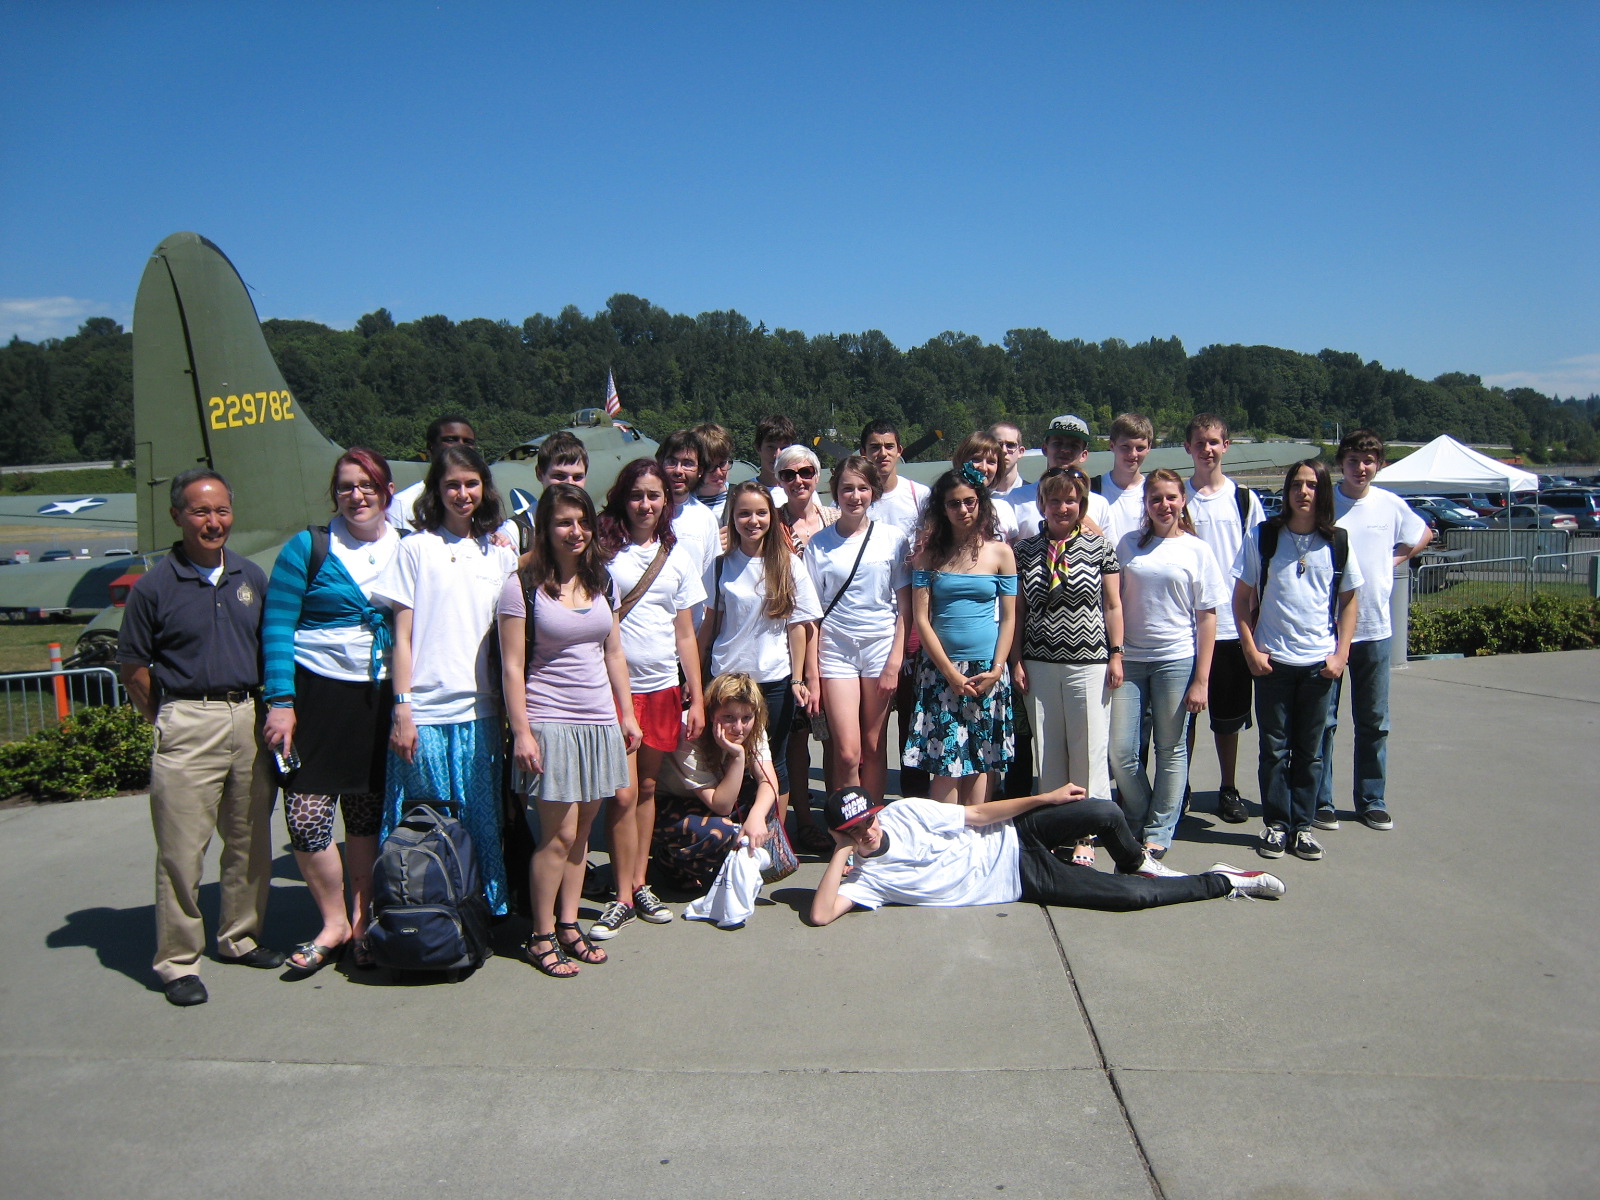 STARTALK Students Staning in Front of a Plane